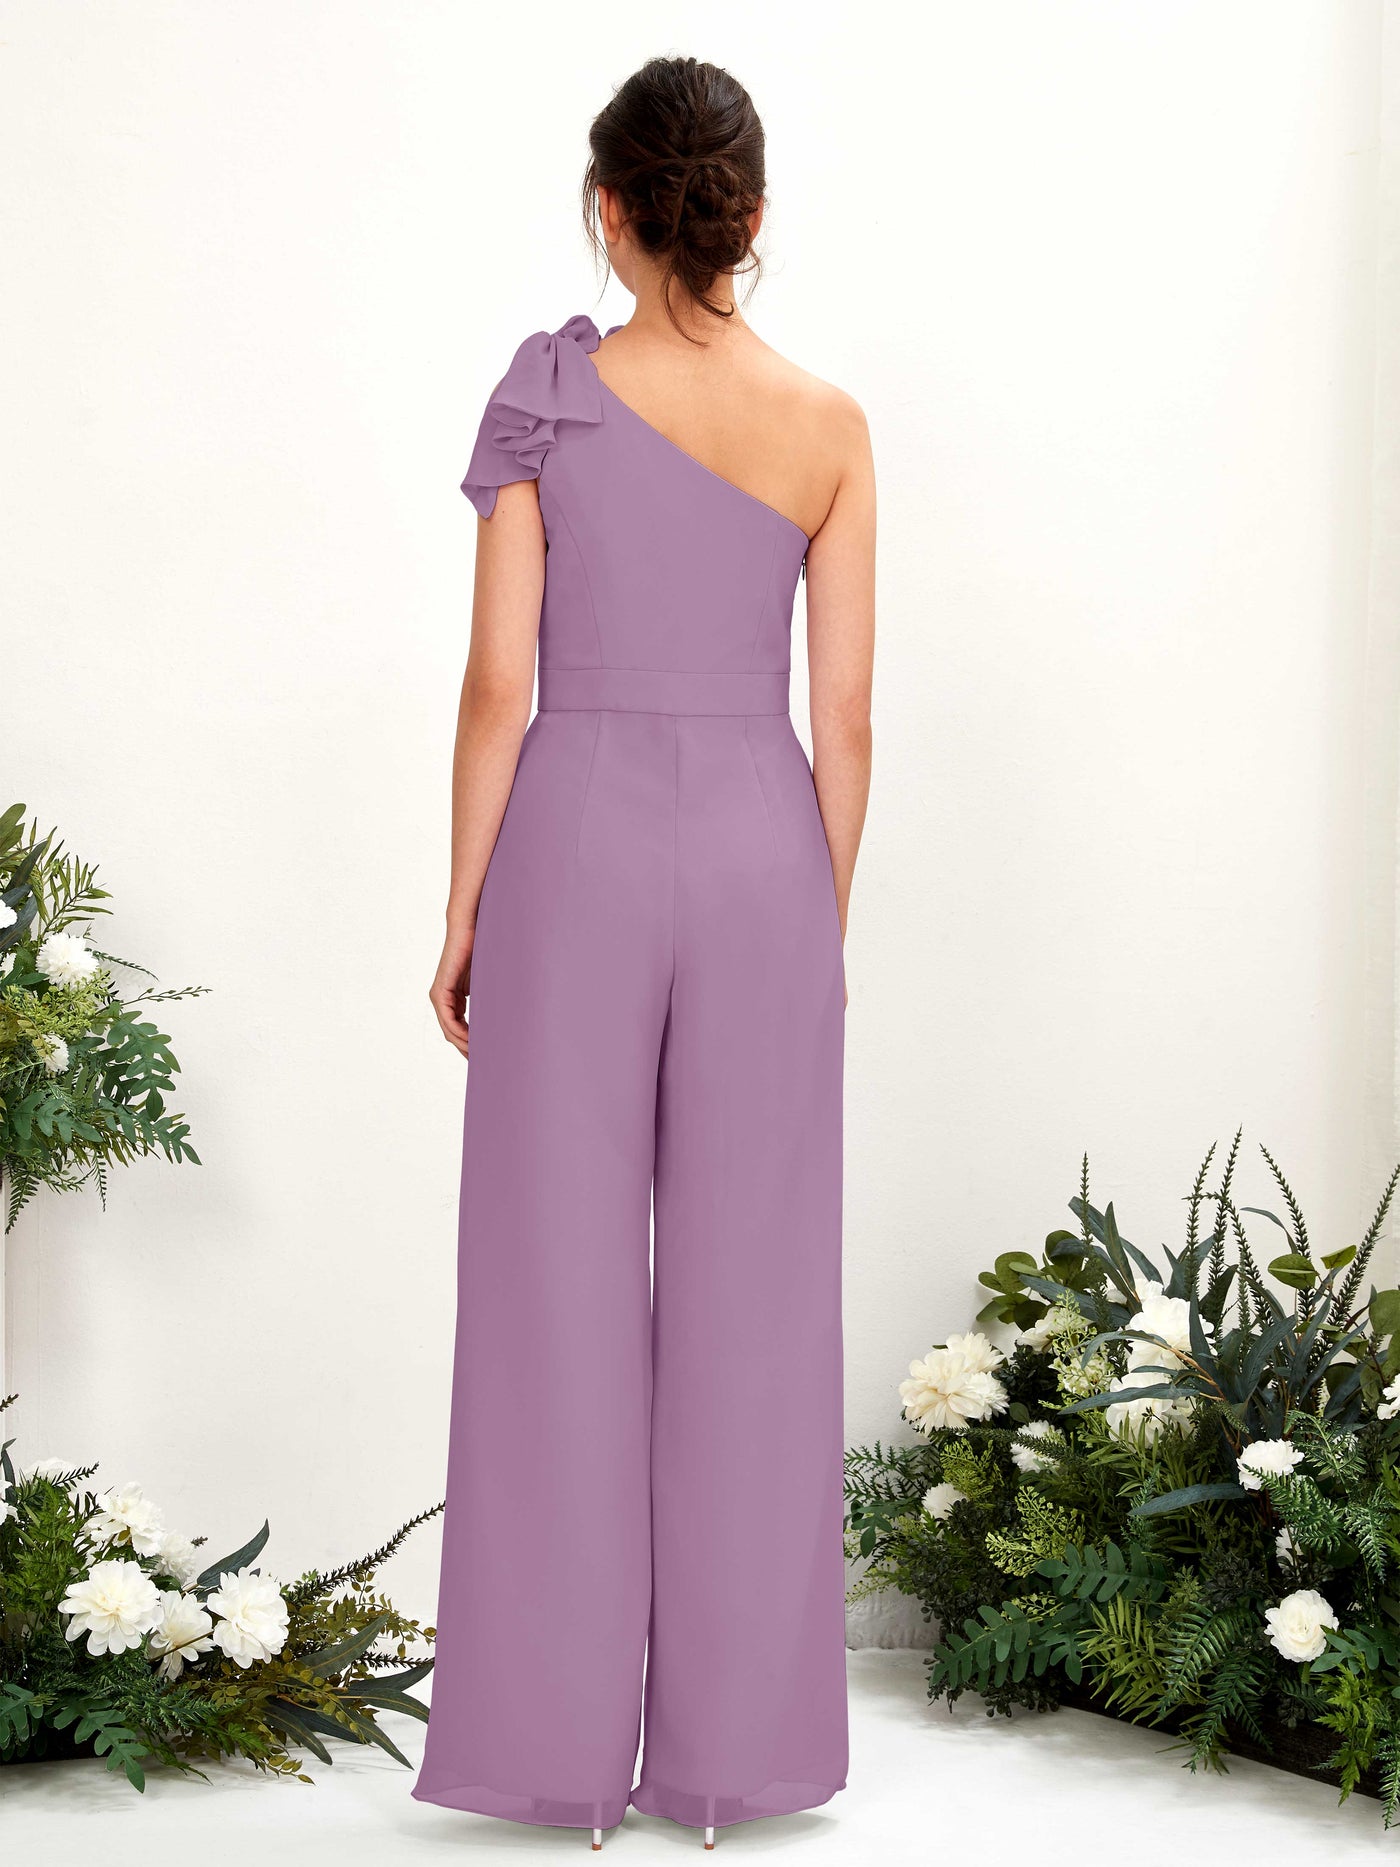 Orchid Mist Bridesmaid Dresses Bridesmaid Dress Chiffon One Shoulder Full Length Sleeveless Wedding Party Dress (81220821)#color_orchid-mist